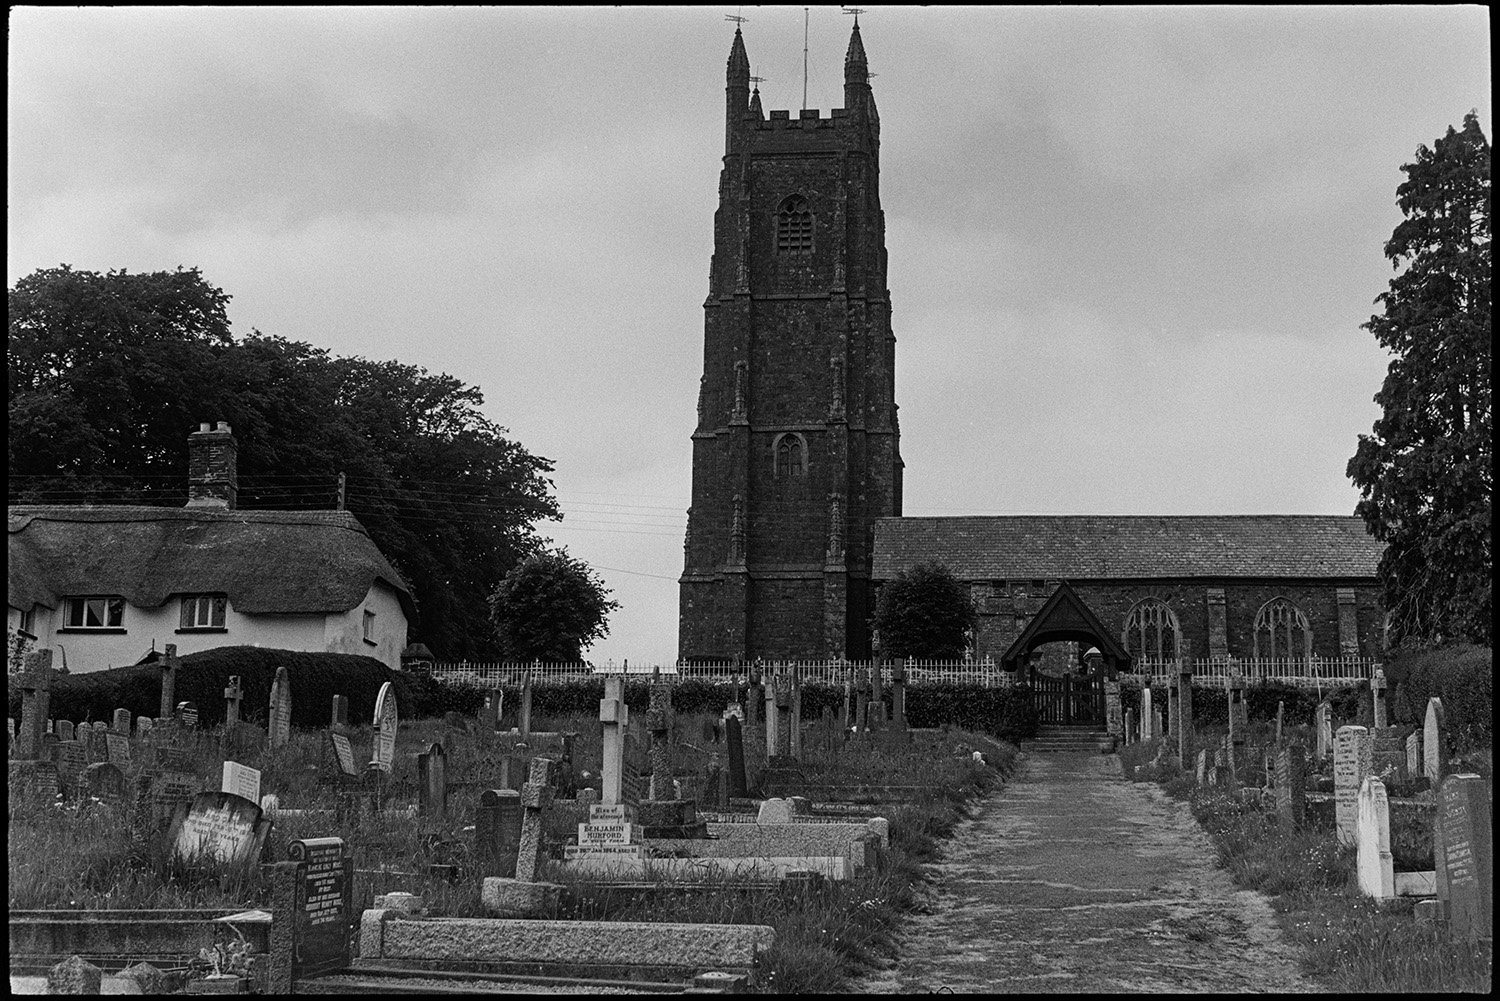 Street scenes with people and cars.
[A view of the church path with gravestones running up to Chulmleigh church and a thatched cottage, in Chulmleigh.]